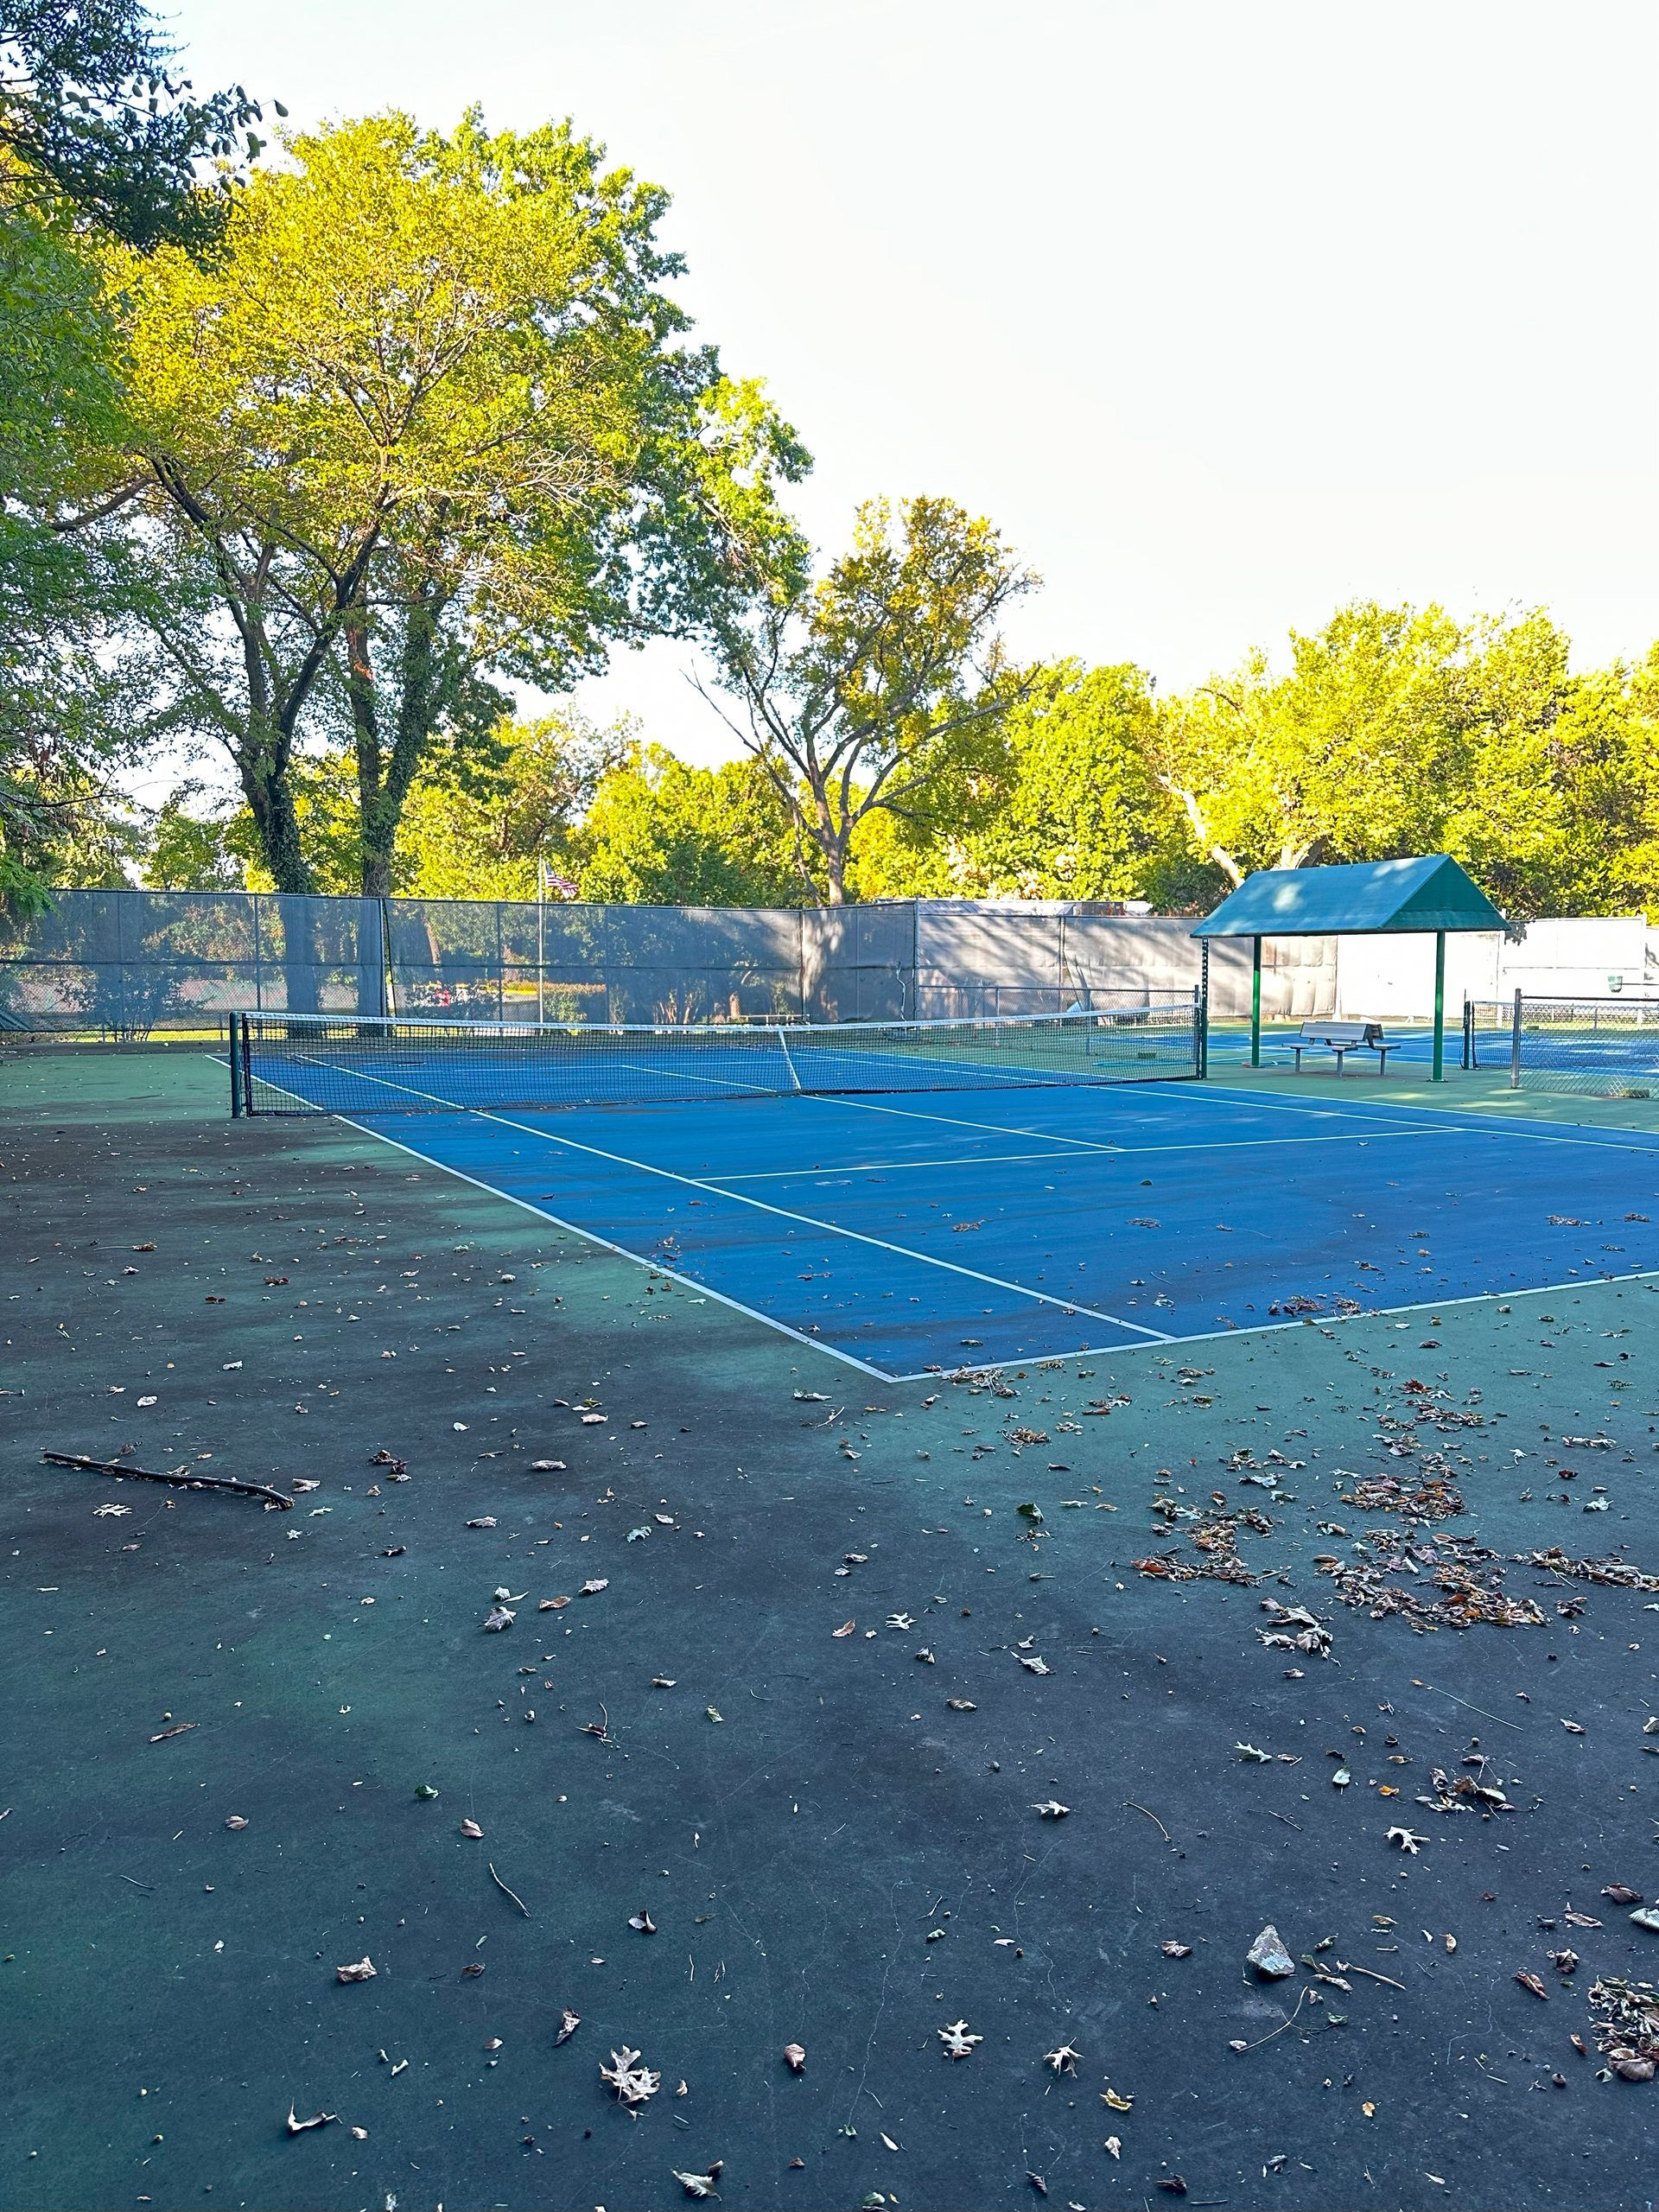 tennis court with black growth and debris all over it